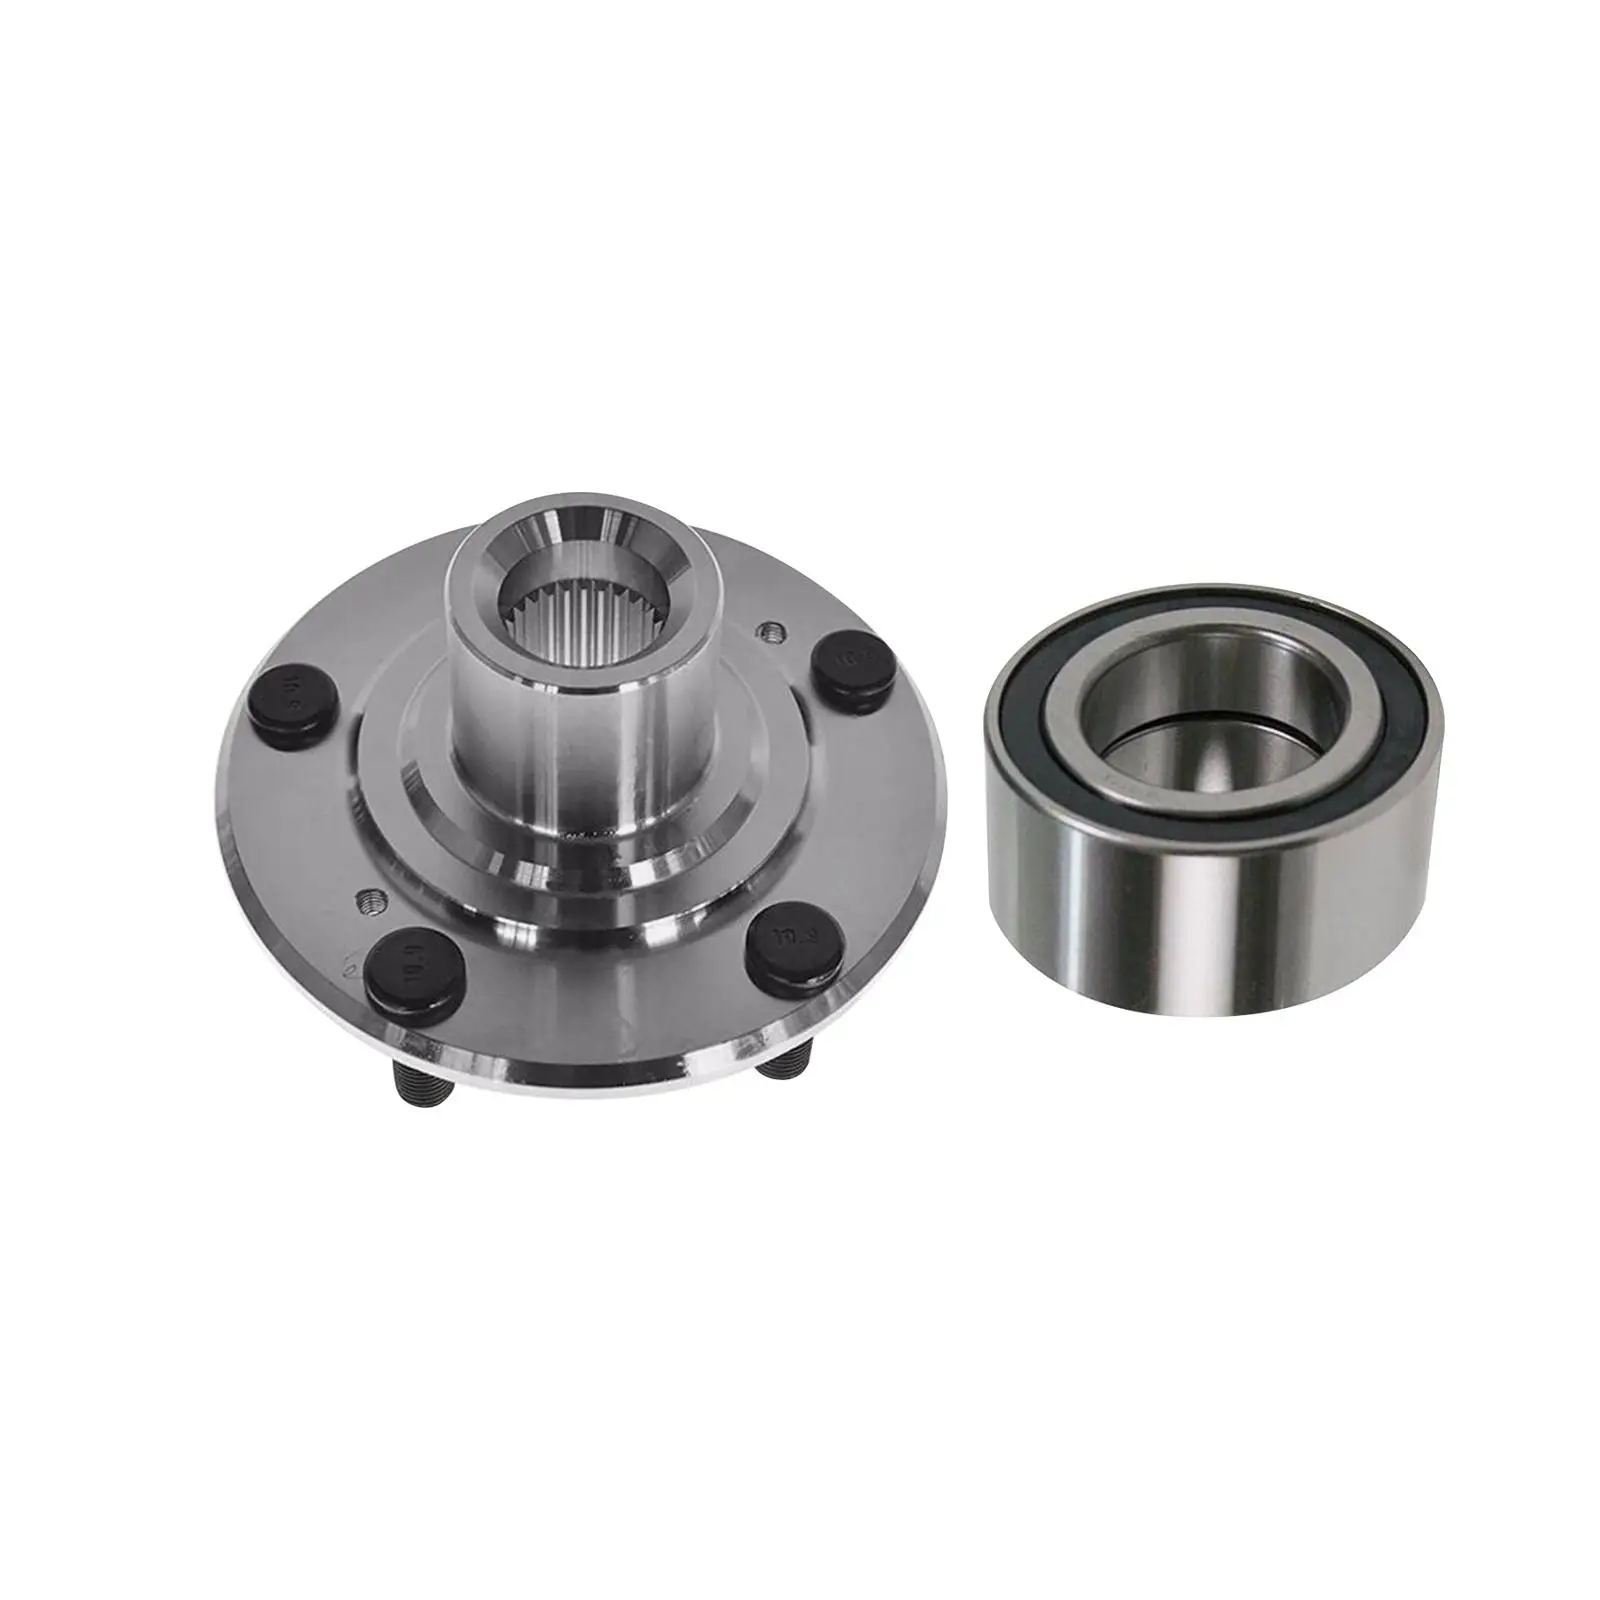 Front Wheel Hub Bearing Set WH188 Nt510110 Hub81 510110 Easy to Install Spare Parts Replacement for Ford Escape 2013-2019